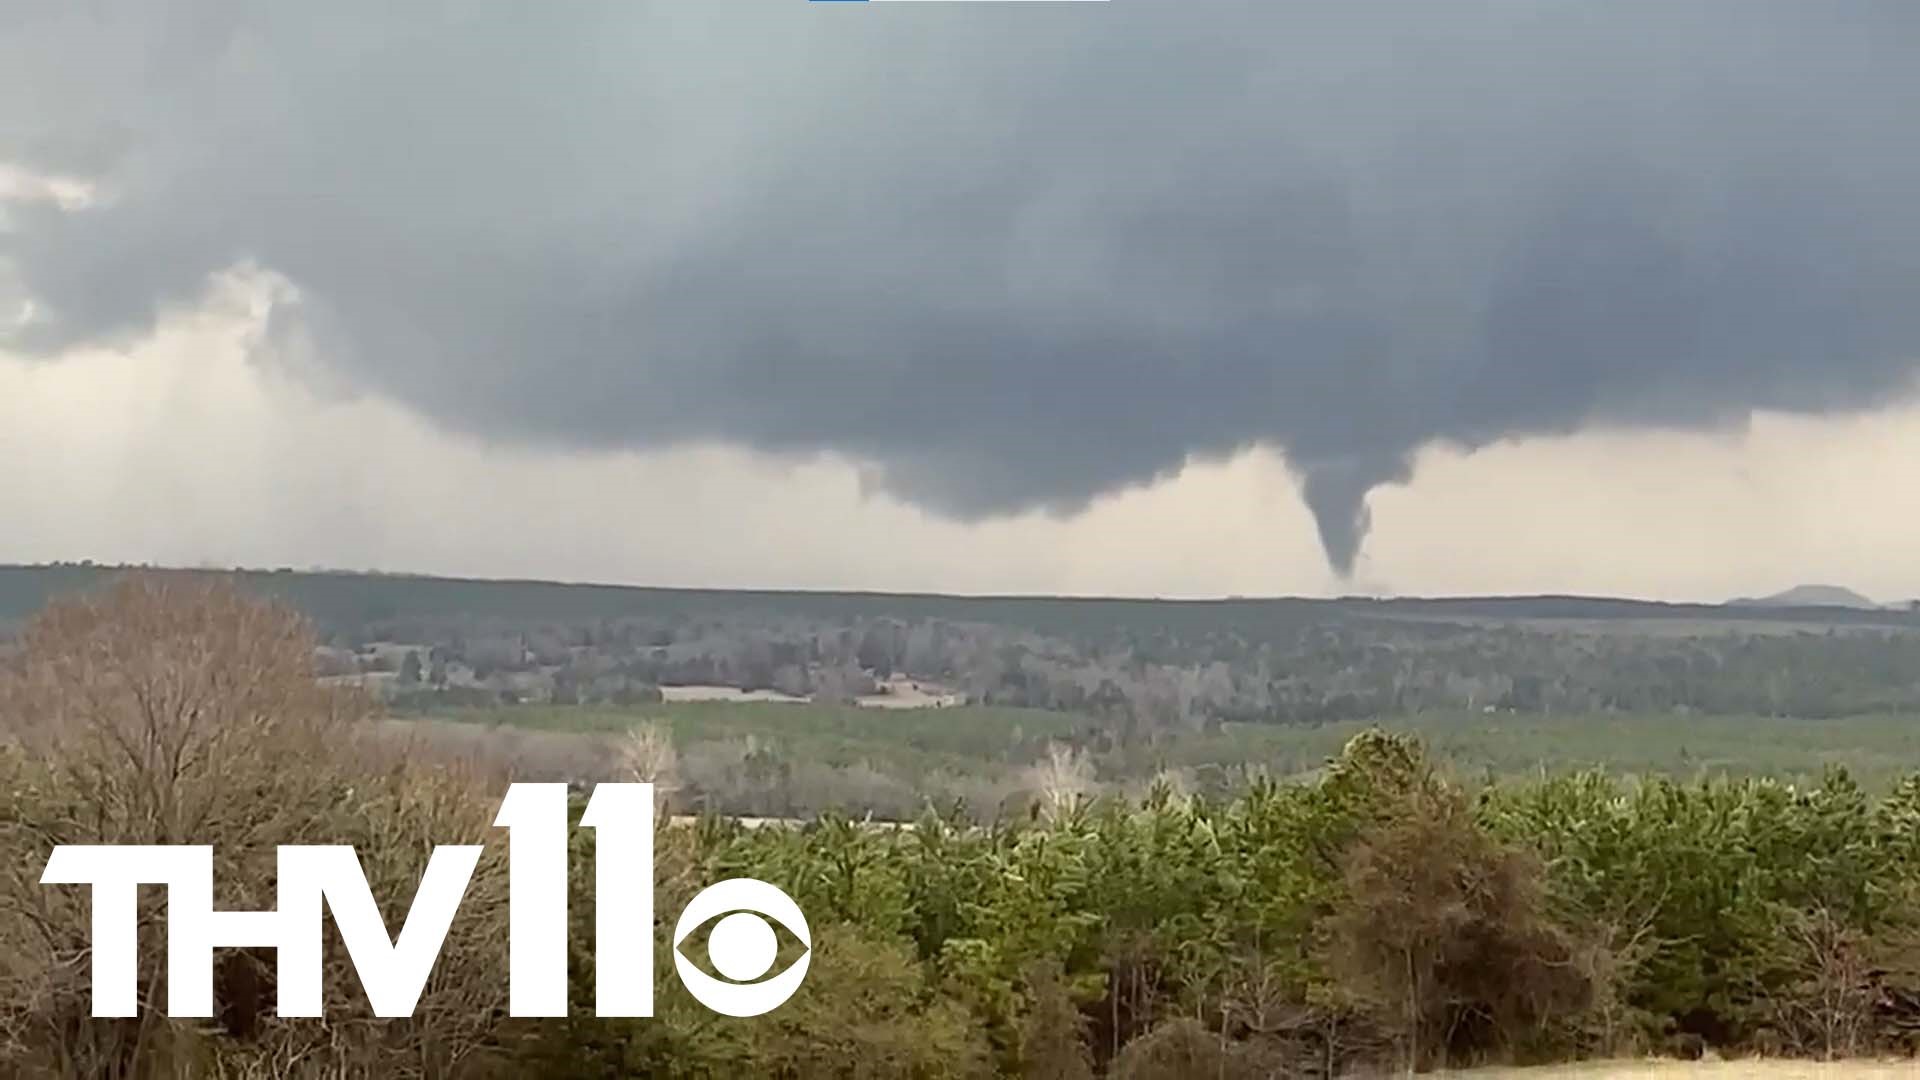 Tornado spotted as severe weather impacts parts of Arkansas